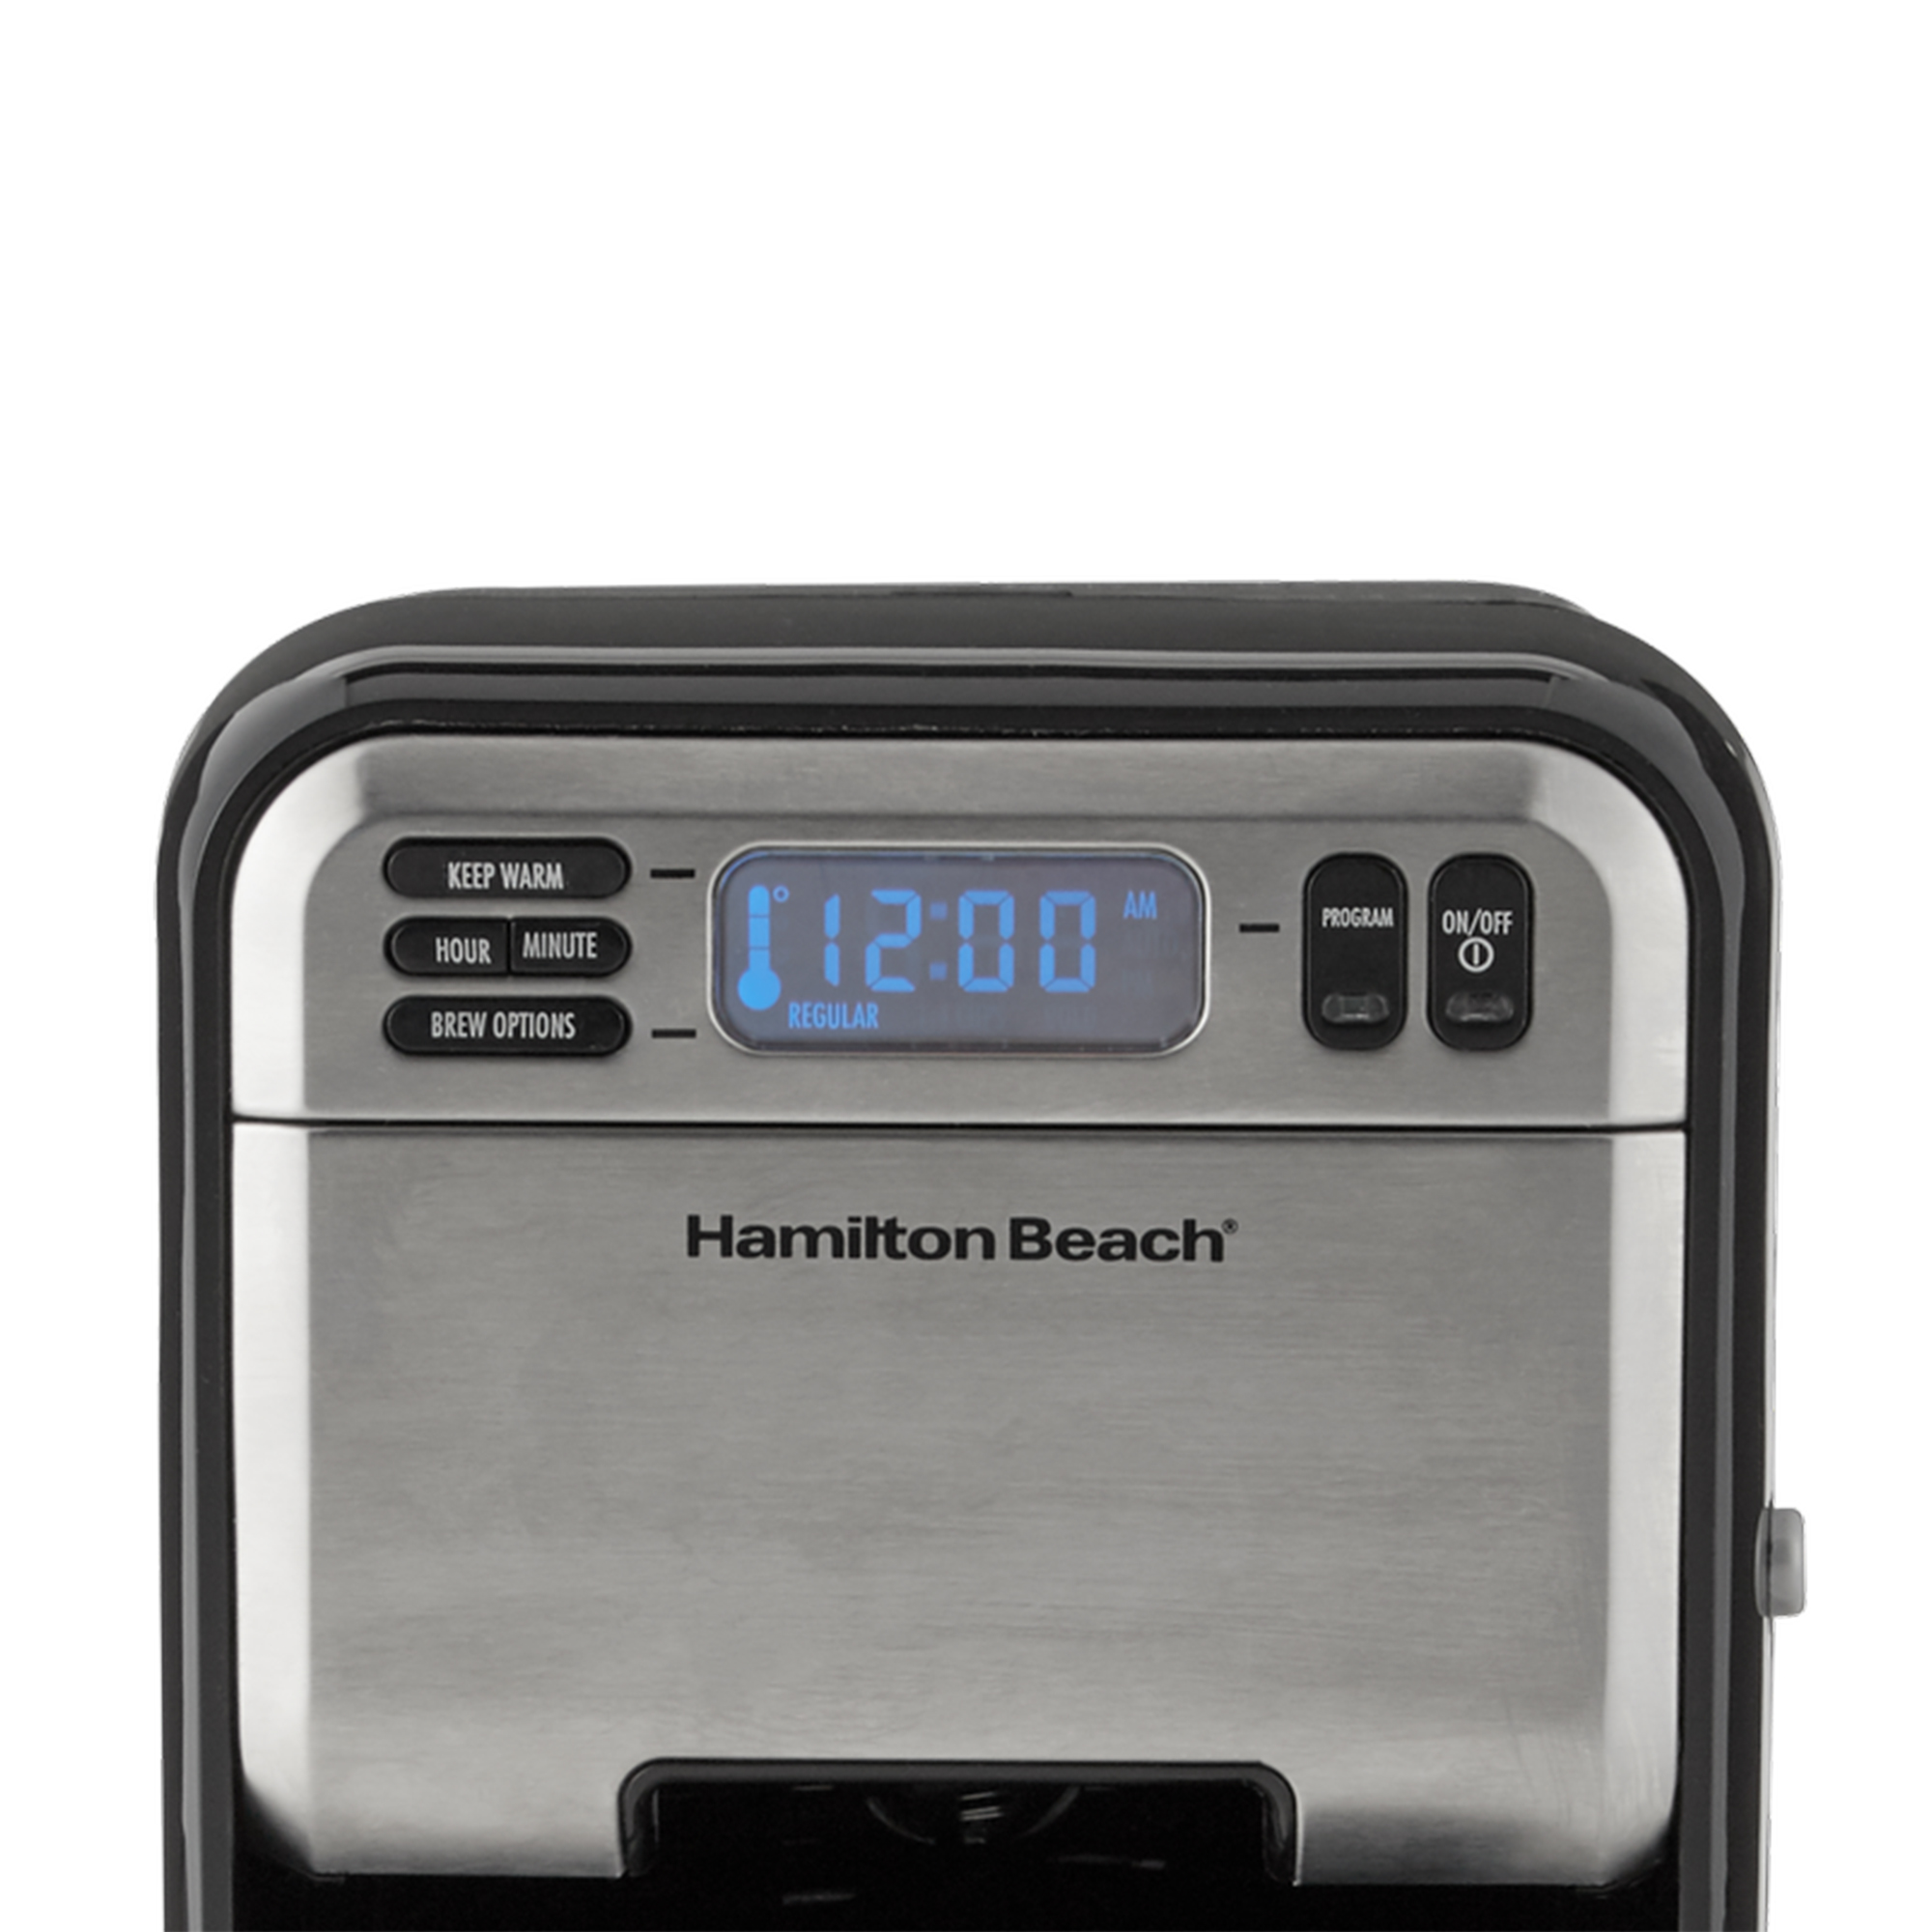 Hamilton Beach 12 Cup Digital Automatic LCD Programmable Coffee Maker Brewer - image 4 of 6